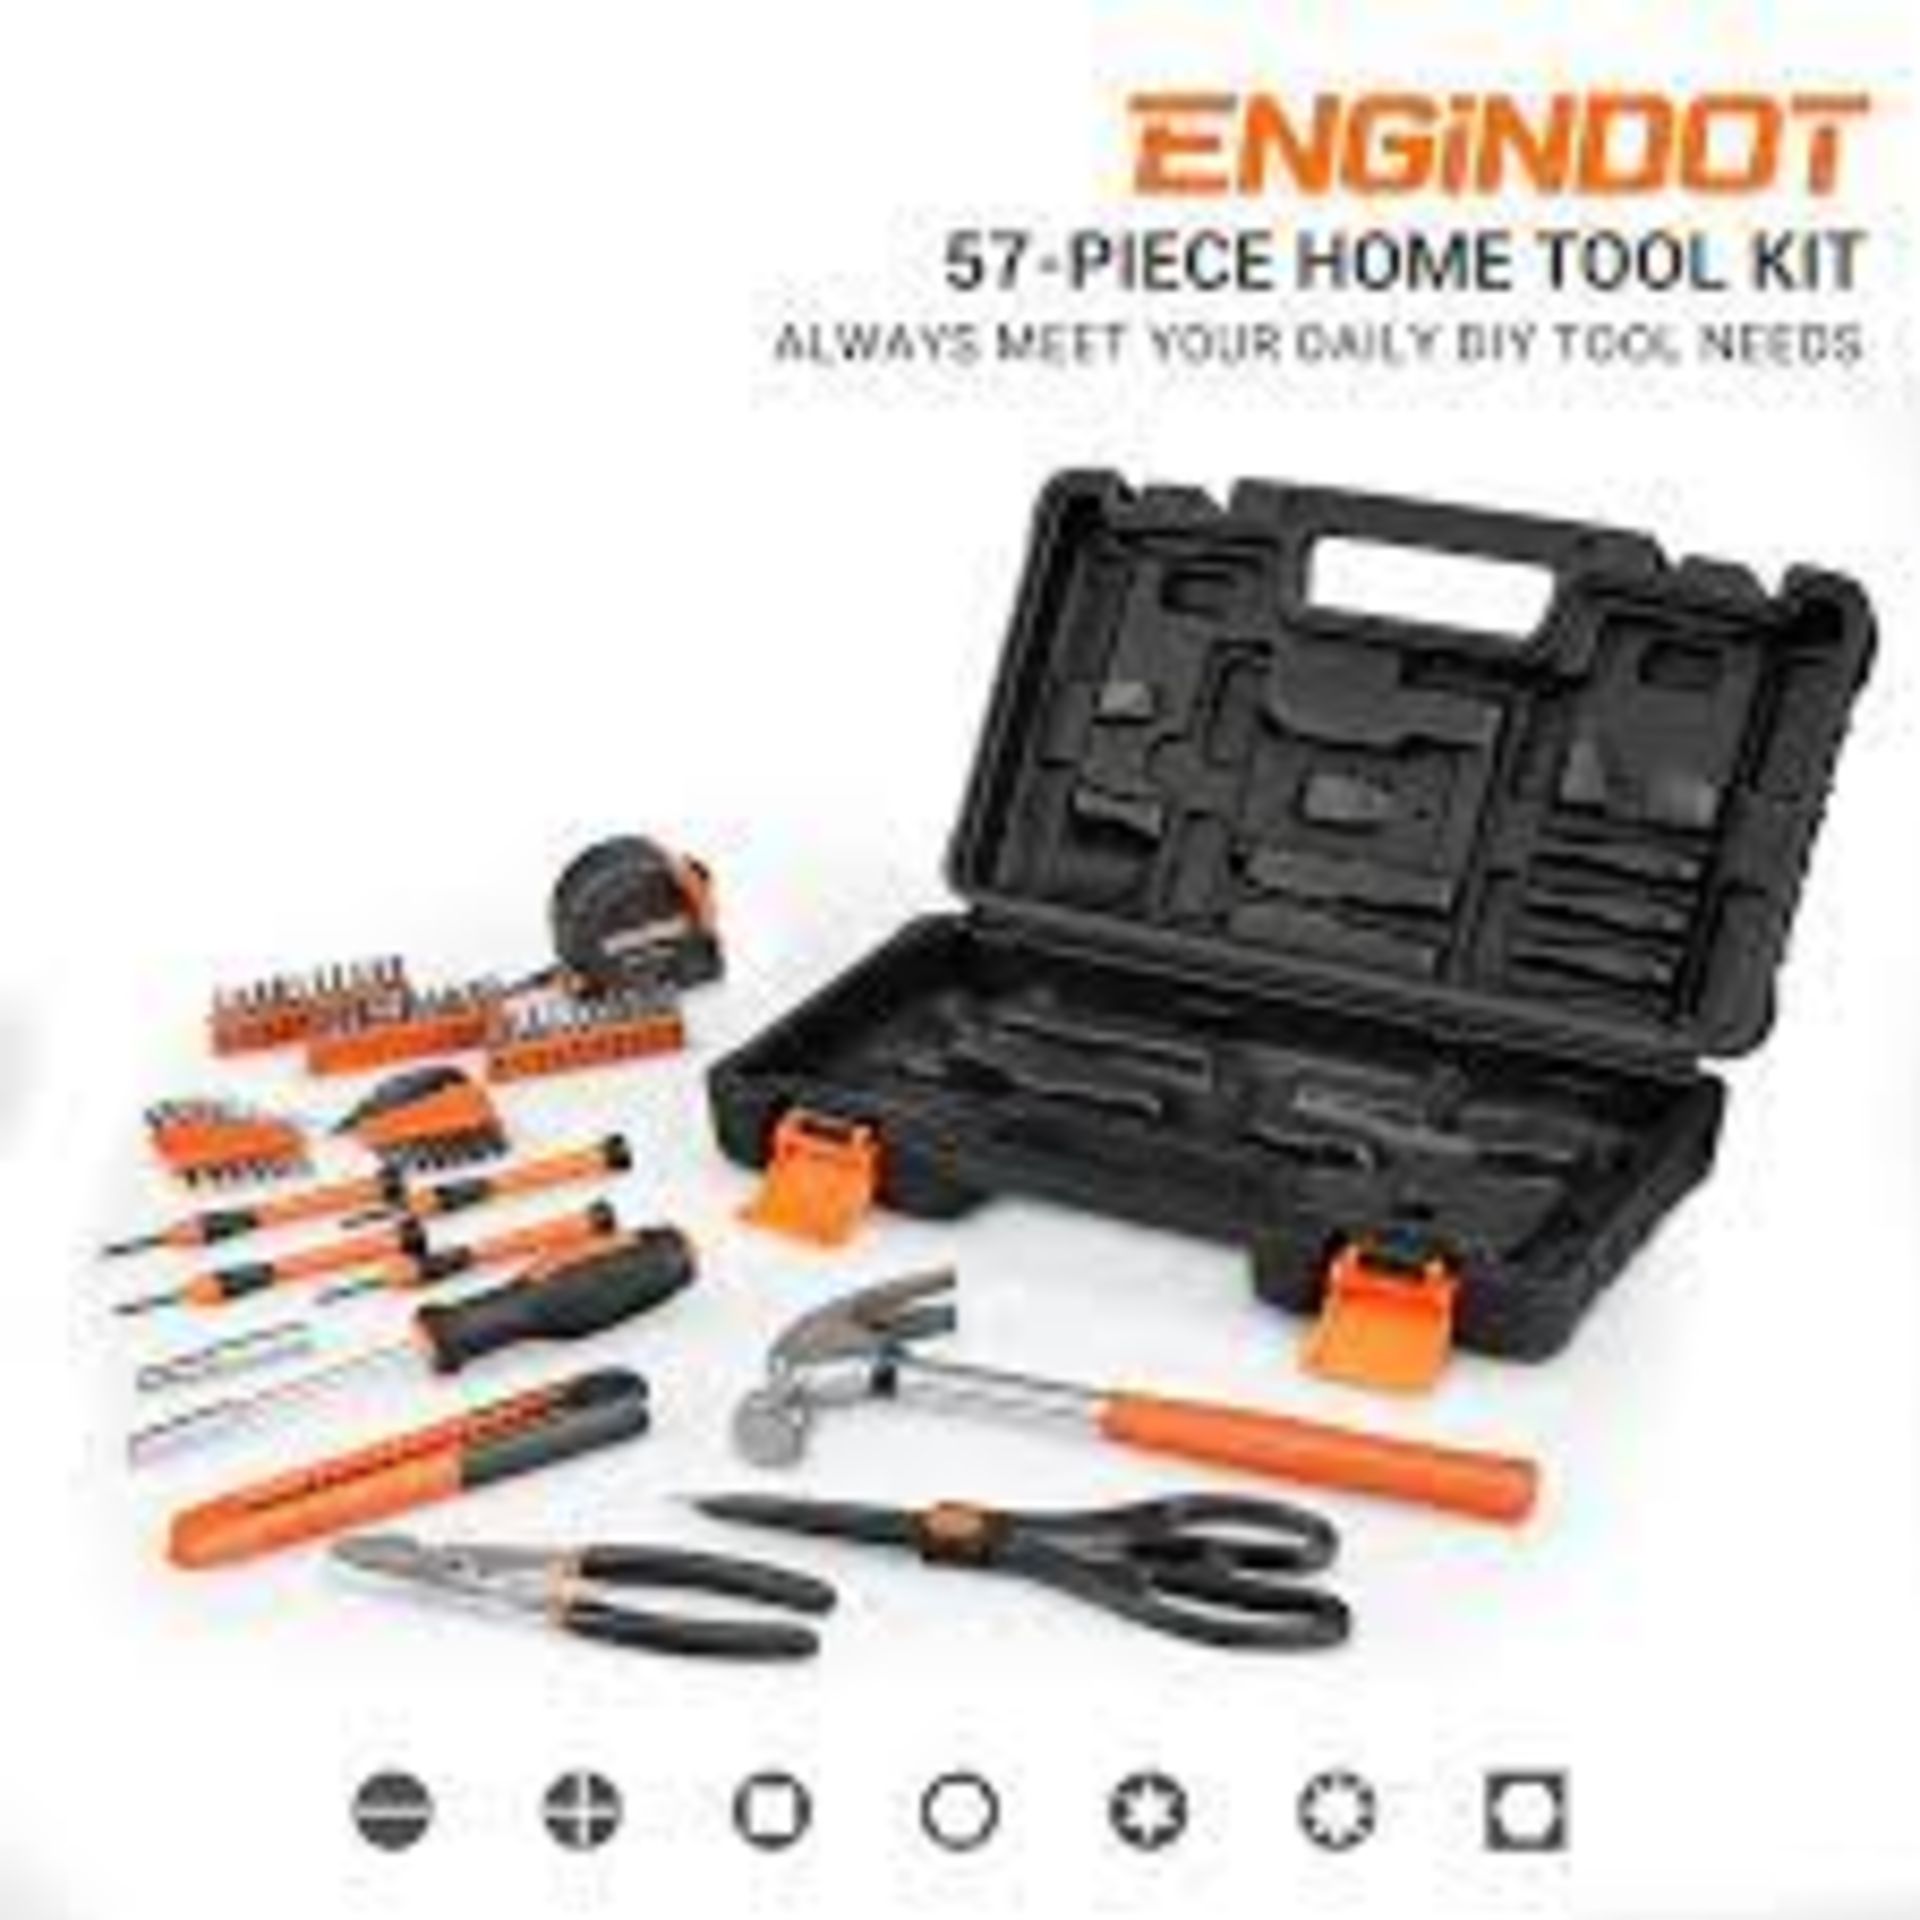 4 X NEW BOXED ENGiNDOT Home Tool Kit, 57-Piece Basic Tool kit with Storage Case. (ROW 10) HANDY - Image 2 of 2